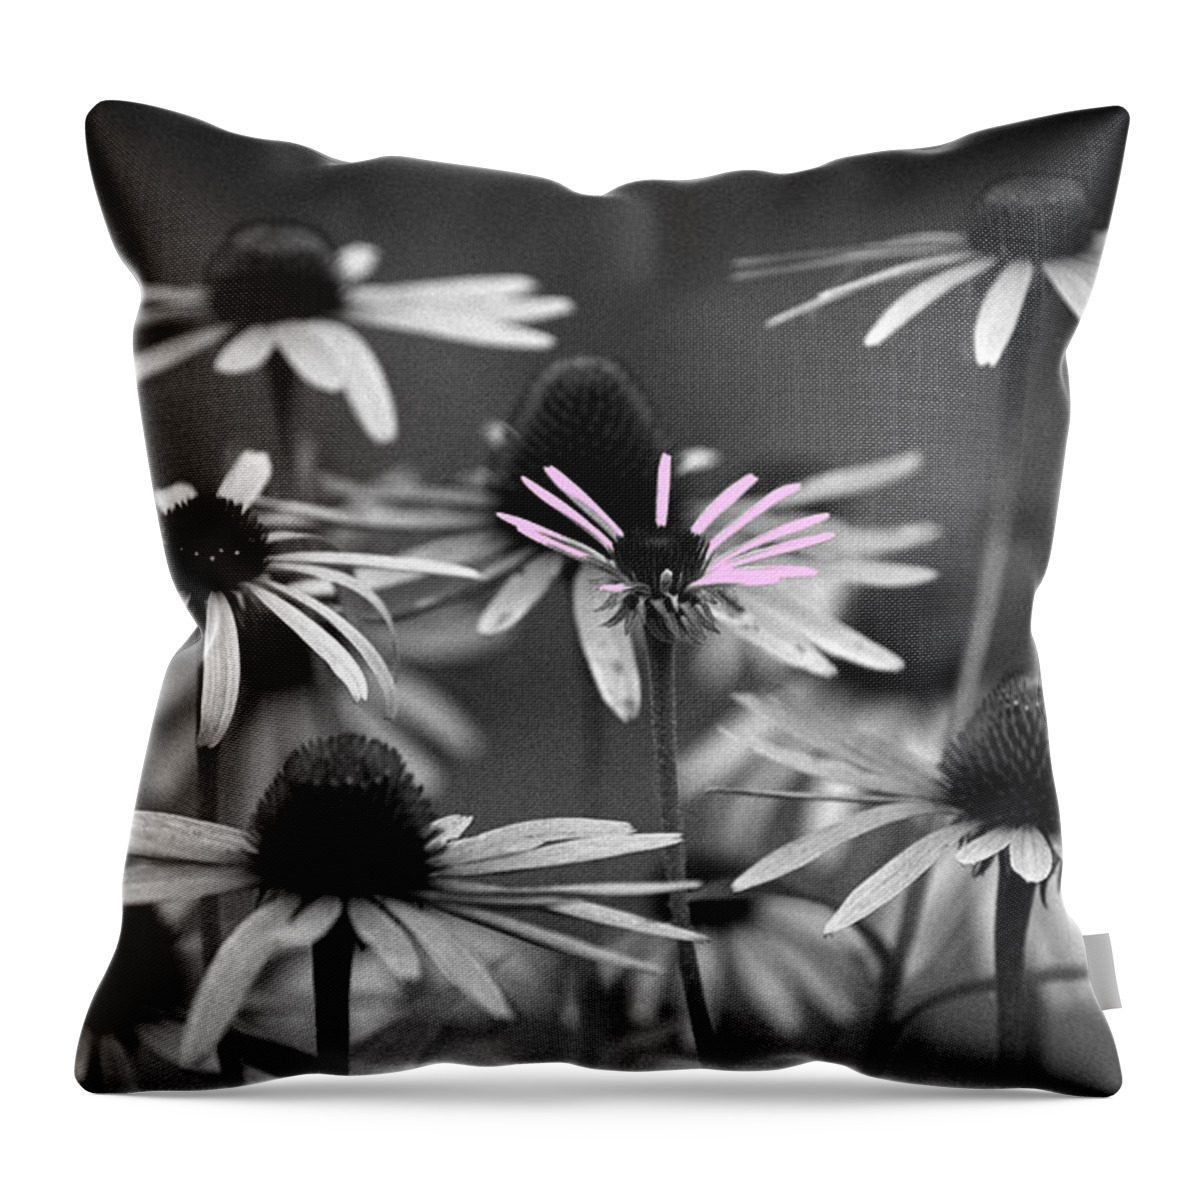 Cone Flowers Throw Pillow featuring the photograph It Takes a Village by Wanda Brandon